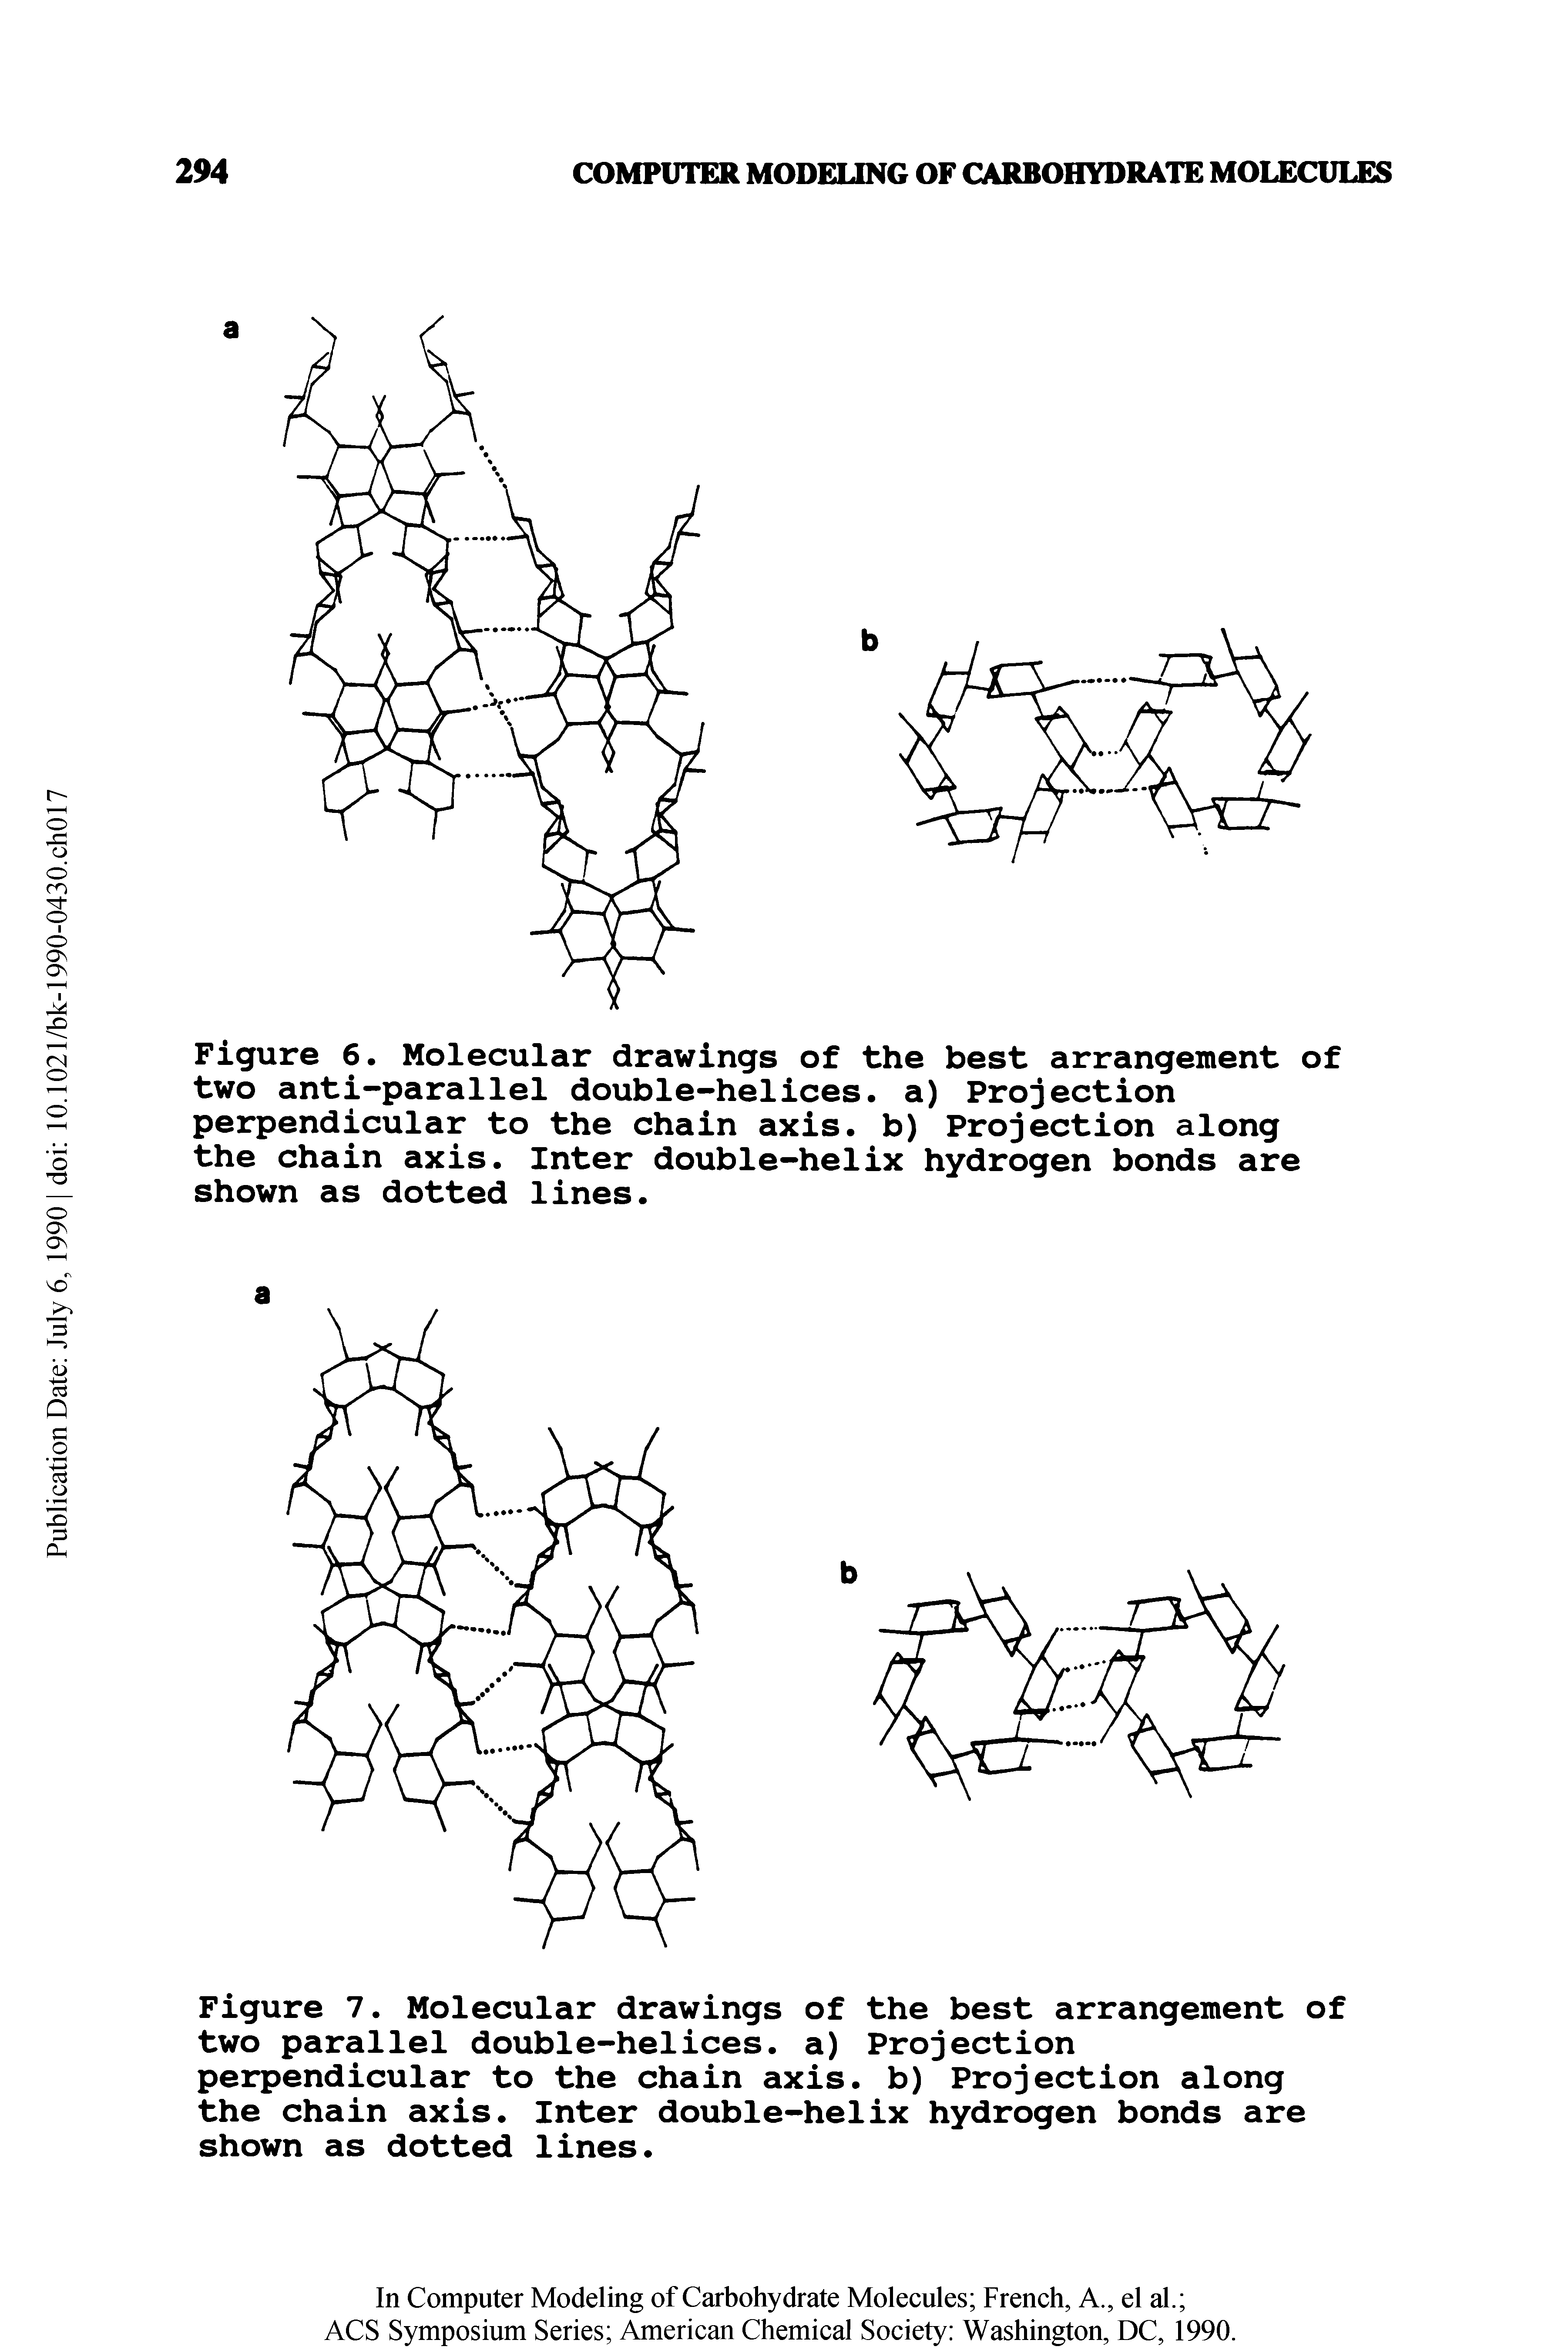 Figure 6. Molecular drawings of the best arrangement of two anti-parallel double-helices, a) Projection perpendicular to the chain axis, b) Projection along the chain axis. Inter double-helix hydrogen bonds are shown as dotted lines.